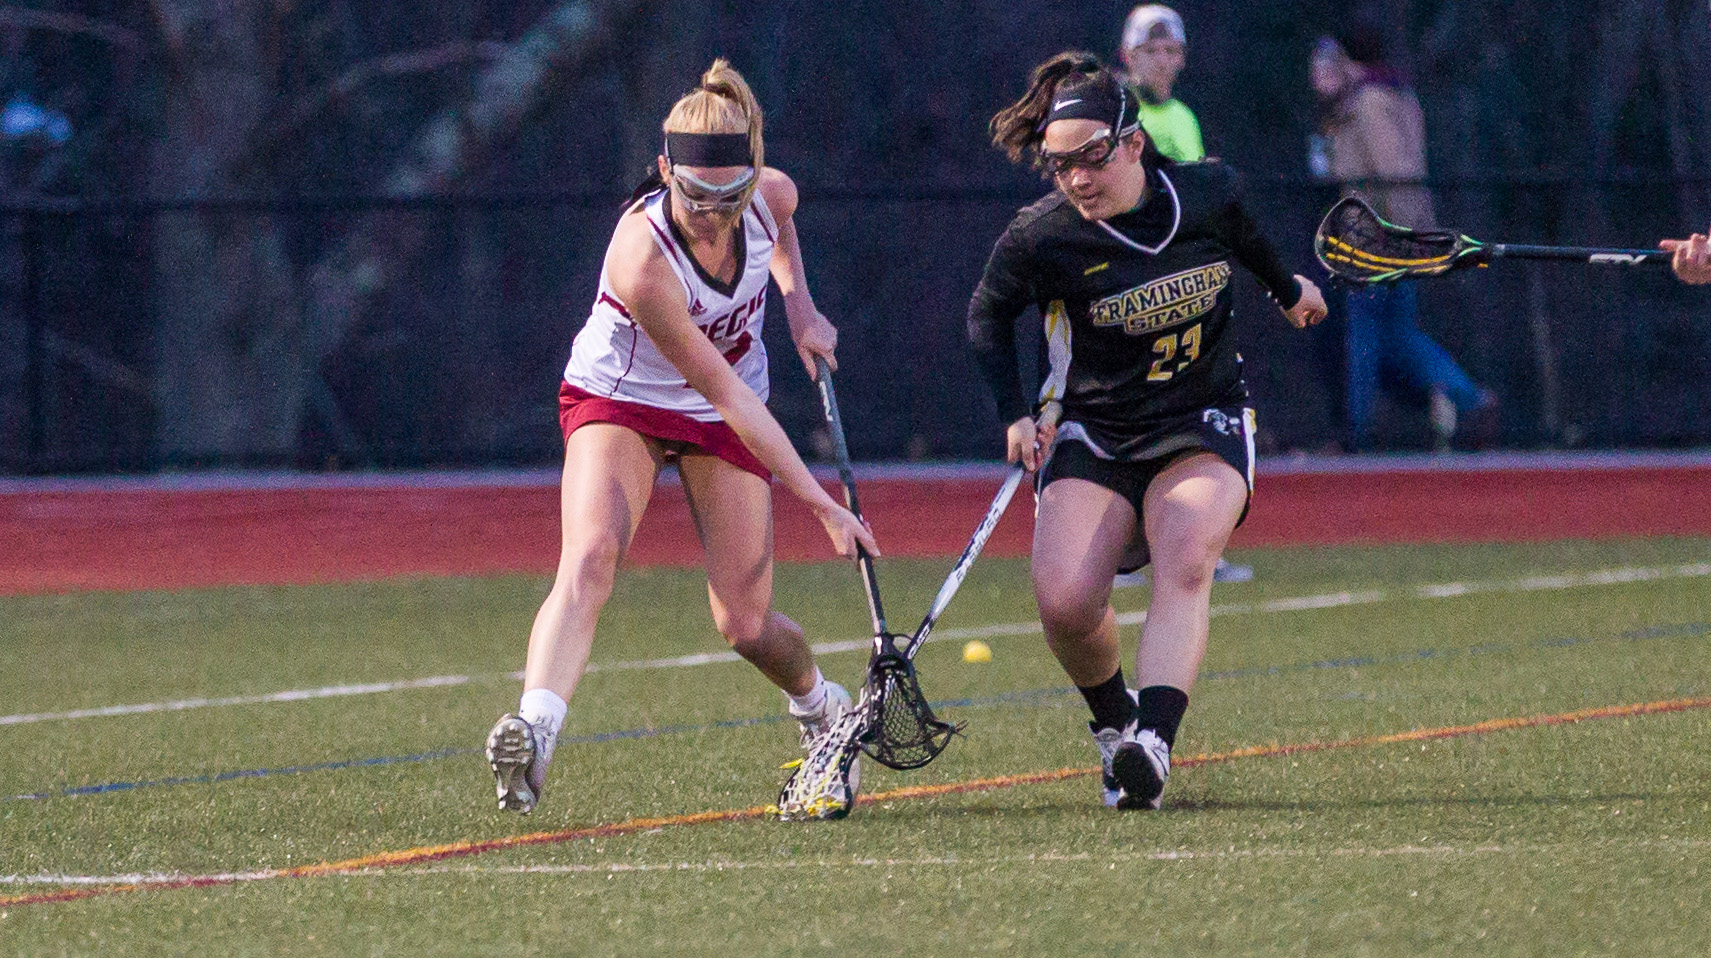 Women's Lacrosse Dominant On Both Ends In Rout of Albertus Magnus